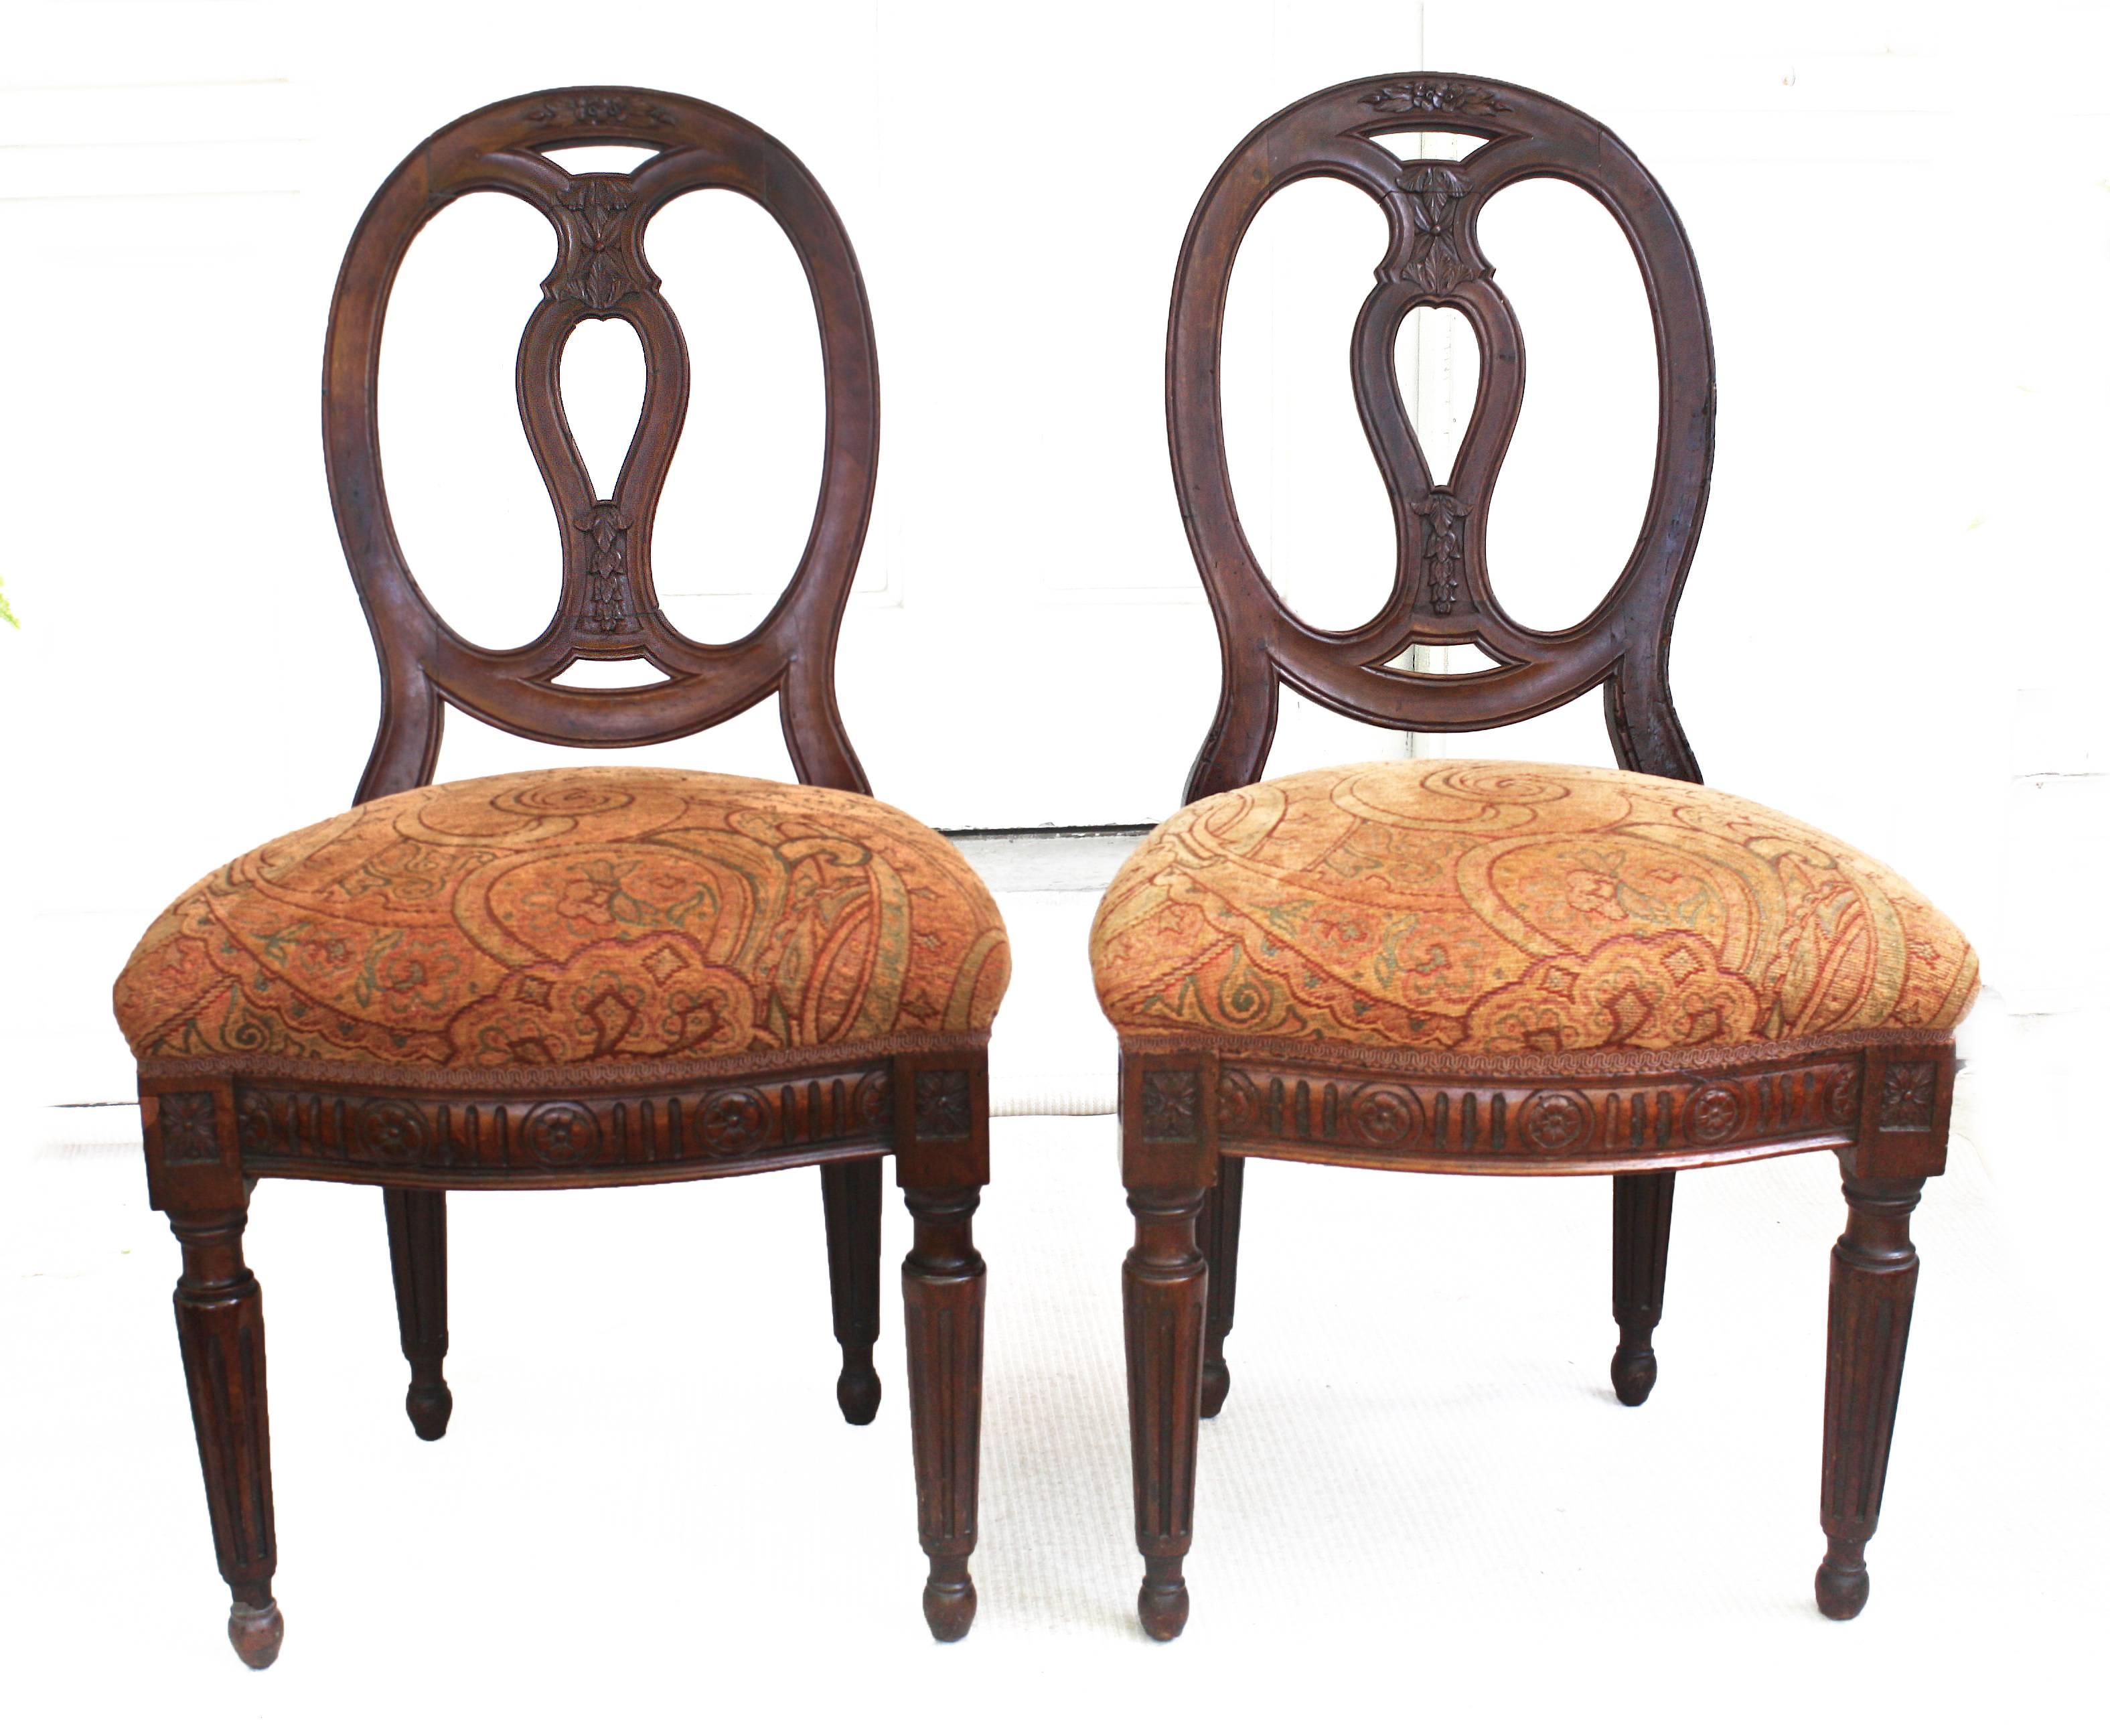 Elaborately hand-carved walnut chairs with thickly-boxed velvet upholstered seats.
Oval carved back splats. Turned and fluted legs. Decoratively carved seat side and front frames. Likely Nord-Ovest origin. Served for decades as backgammon chairs.